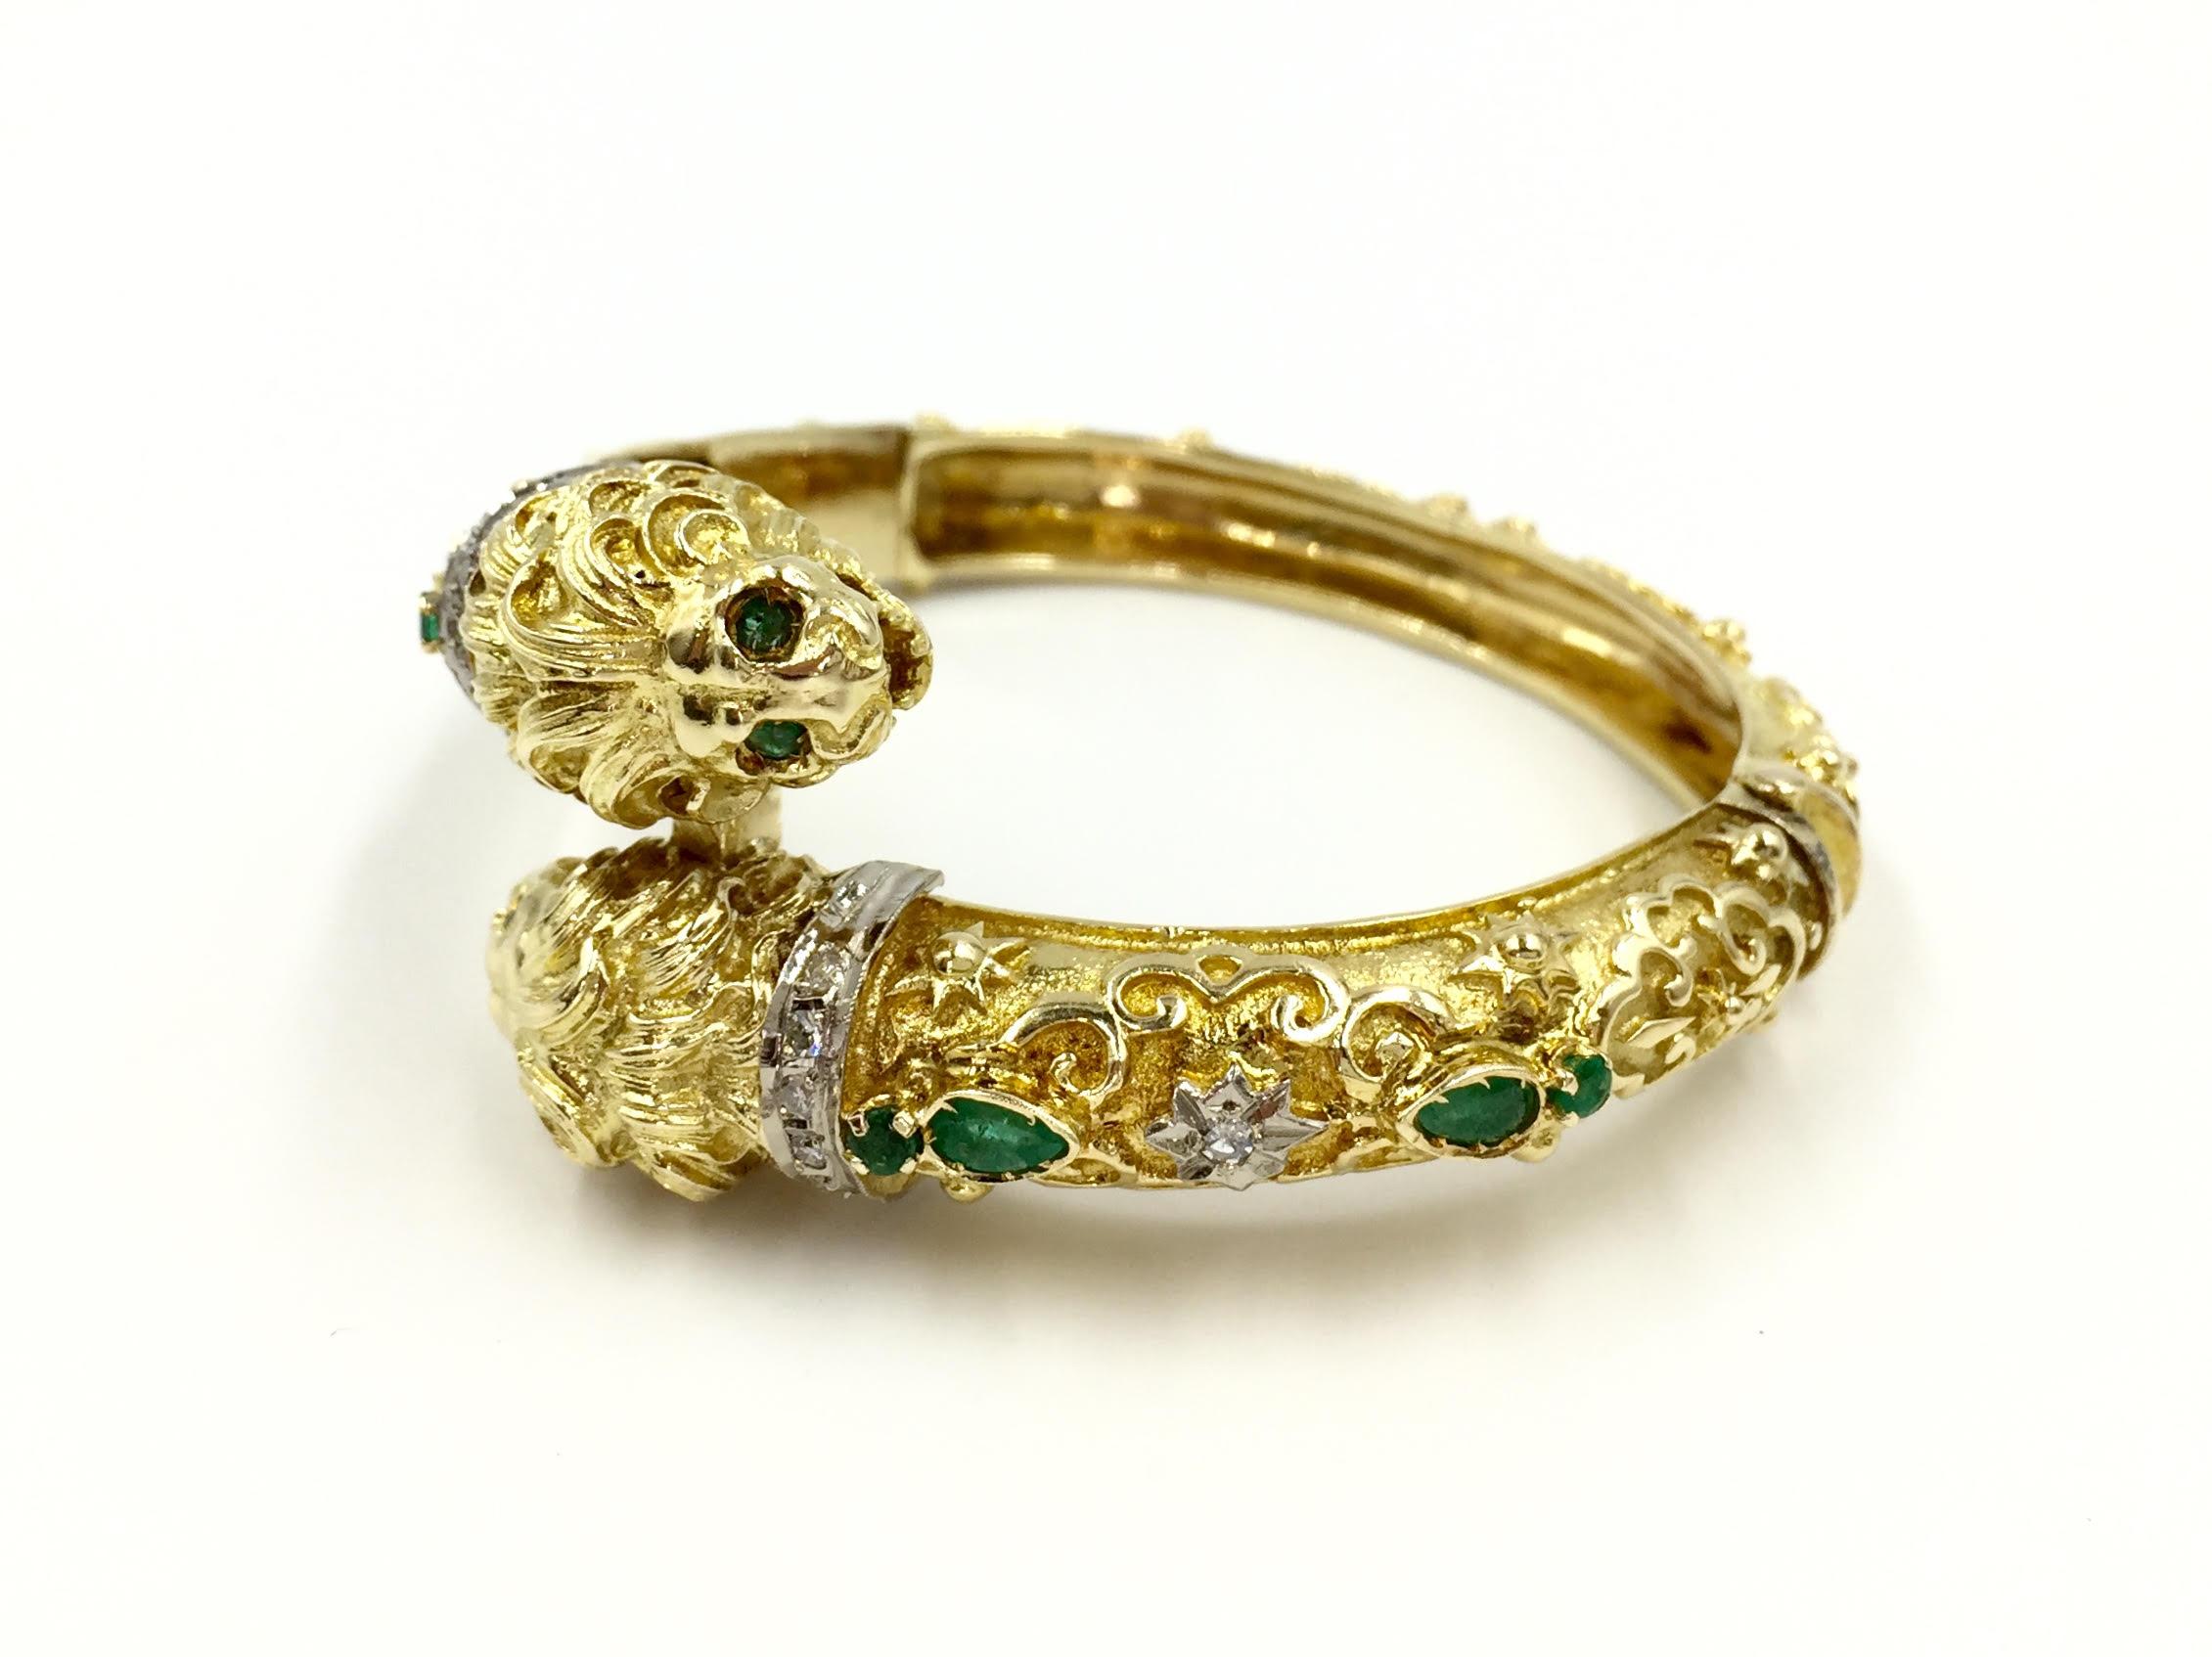 Circa 1960's. A one of a kind find. This unique handmade 18 karat yellow gold bypass style bangle has gorgeous detail and finish from every angle. Two lions heads are adored with emerald eyes and diamond collars. Snap closure with an easy to use